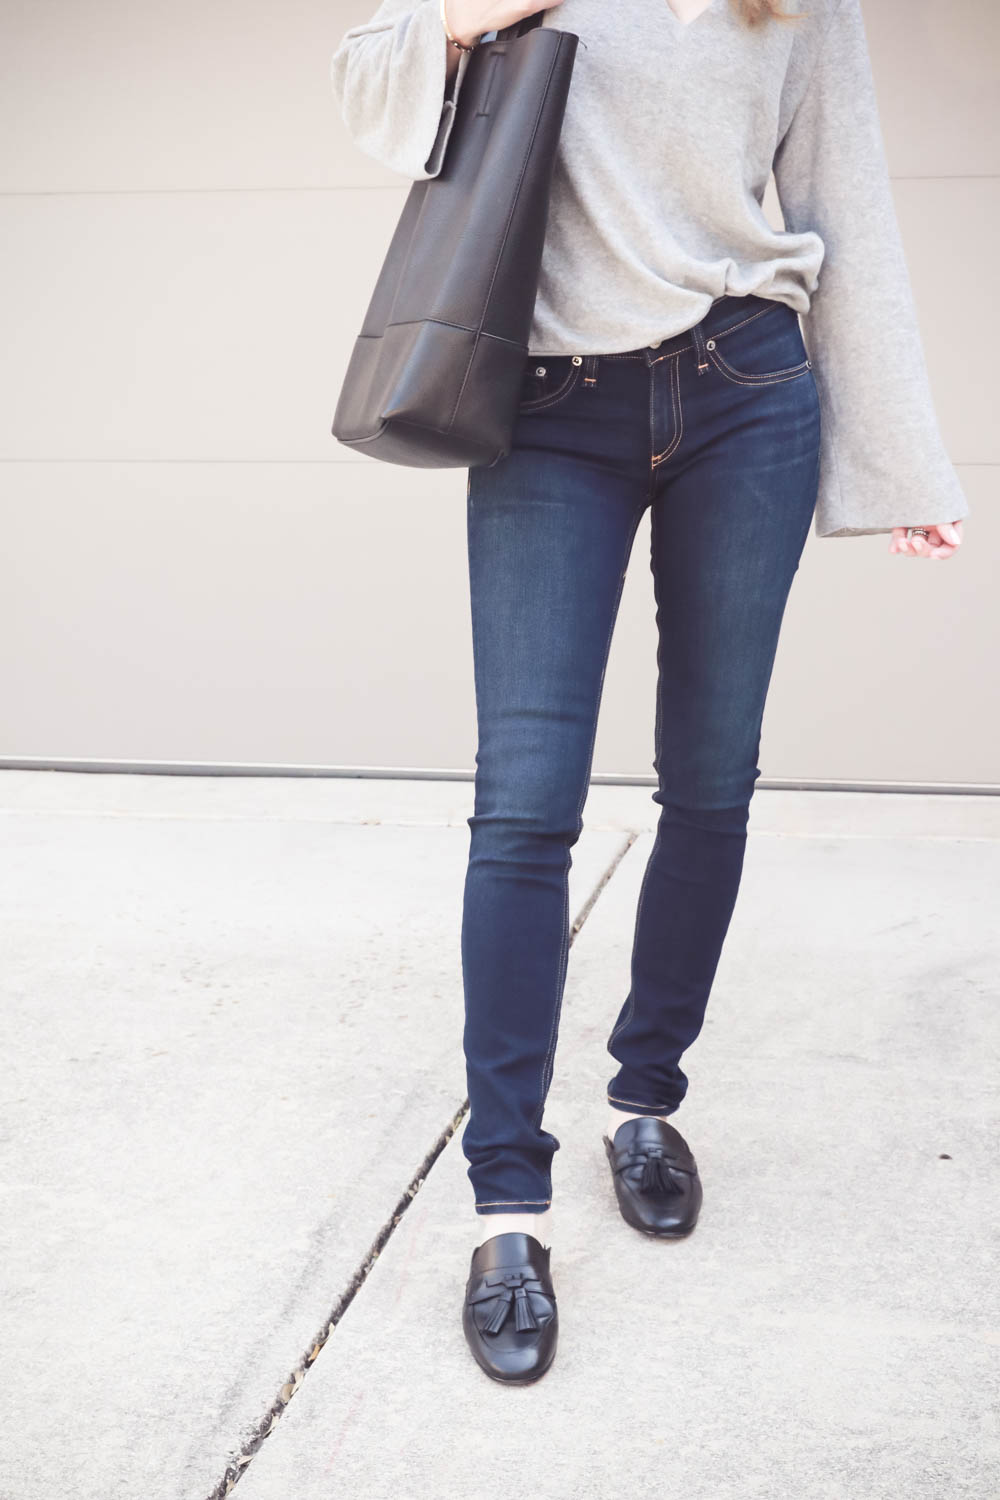 Erin Busbee of BusbeeStyle.com wearing Rag & Bone skinny jeans in bedford from Nordstrom and a PST Project social tee from Nordstrom with a black vegan sole society tote bag